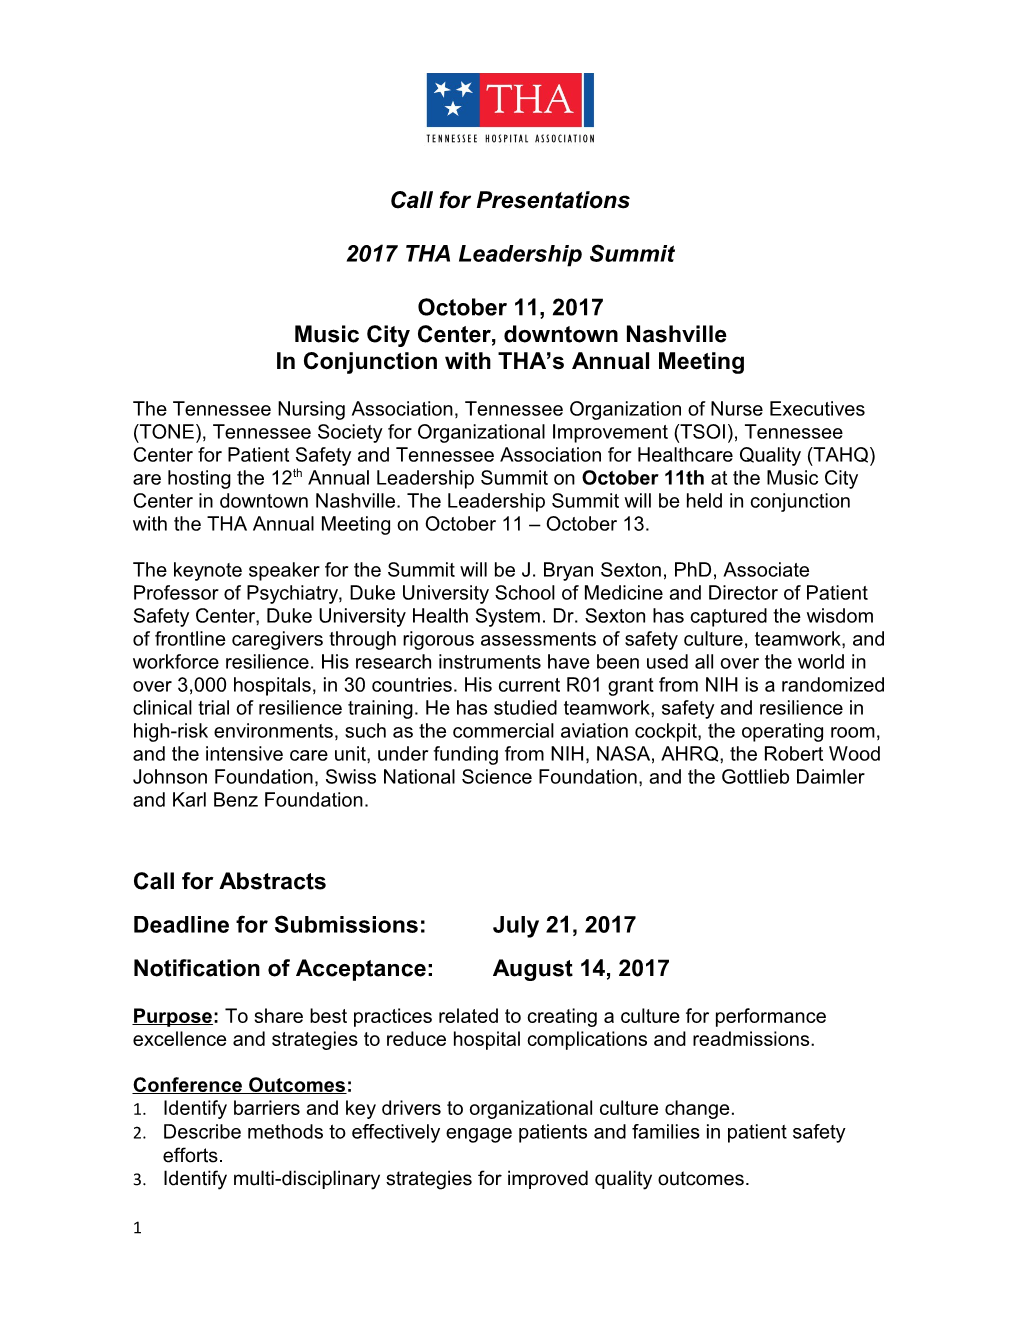 Call for Presentations s2